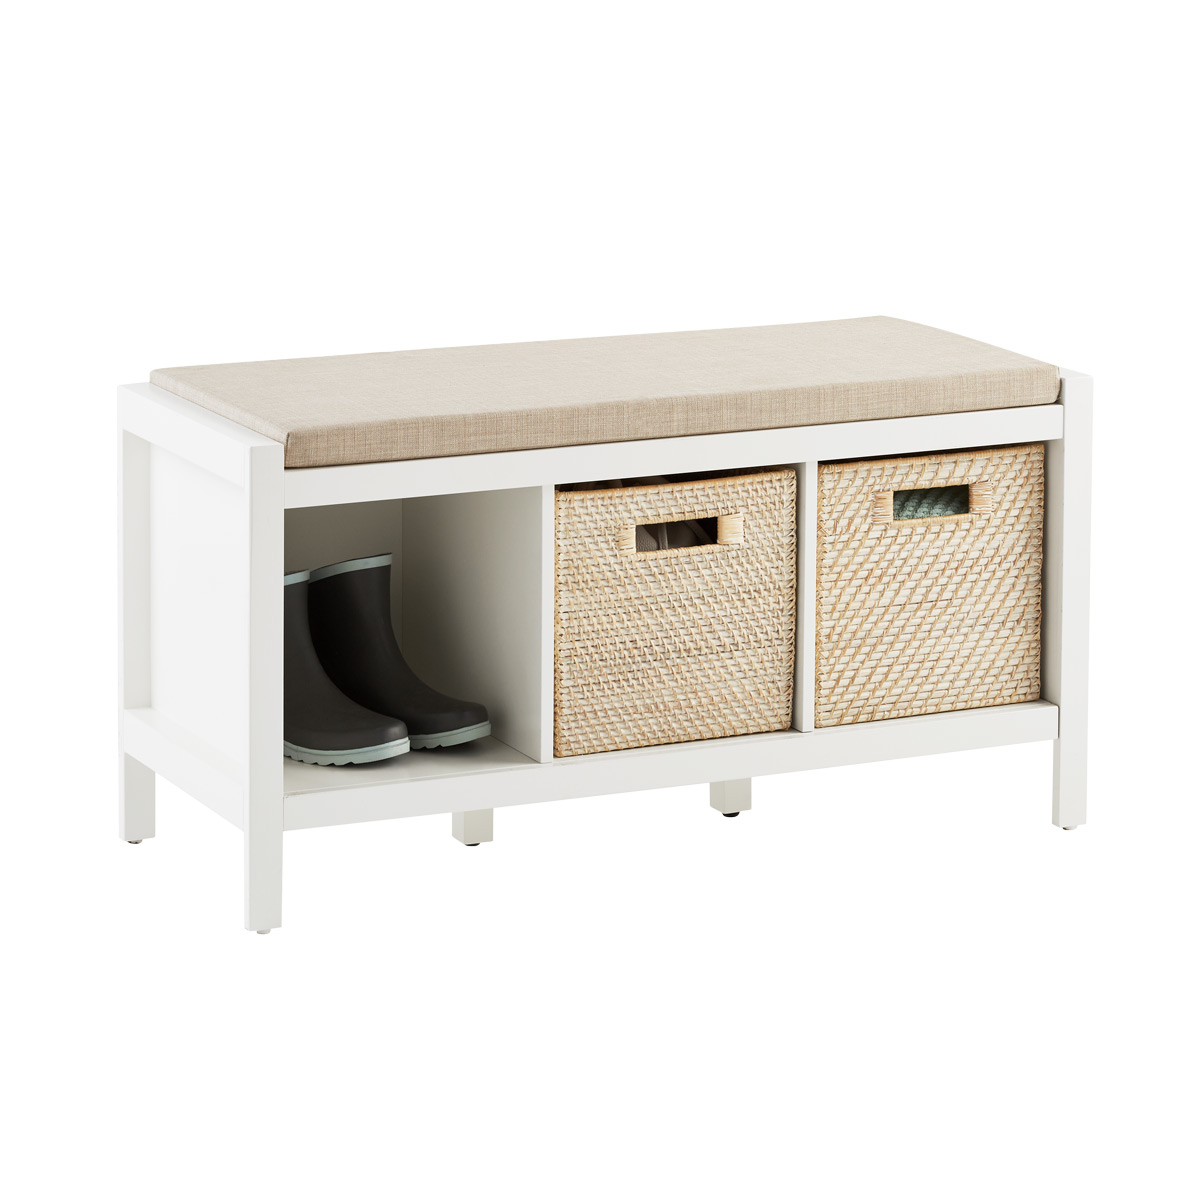 Clybourn 3-Cubby Bench | The Container Store